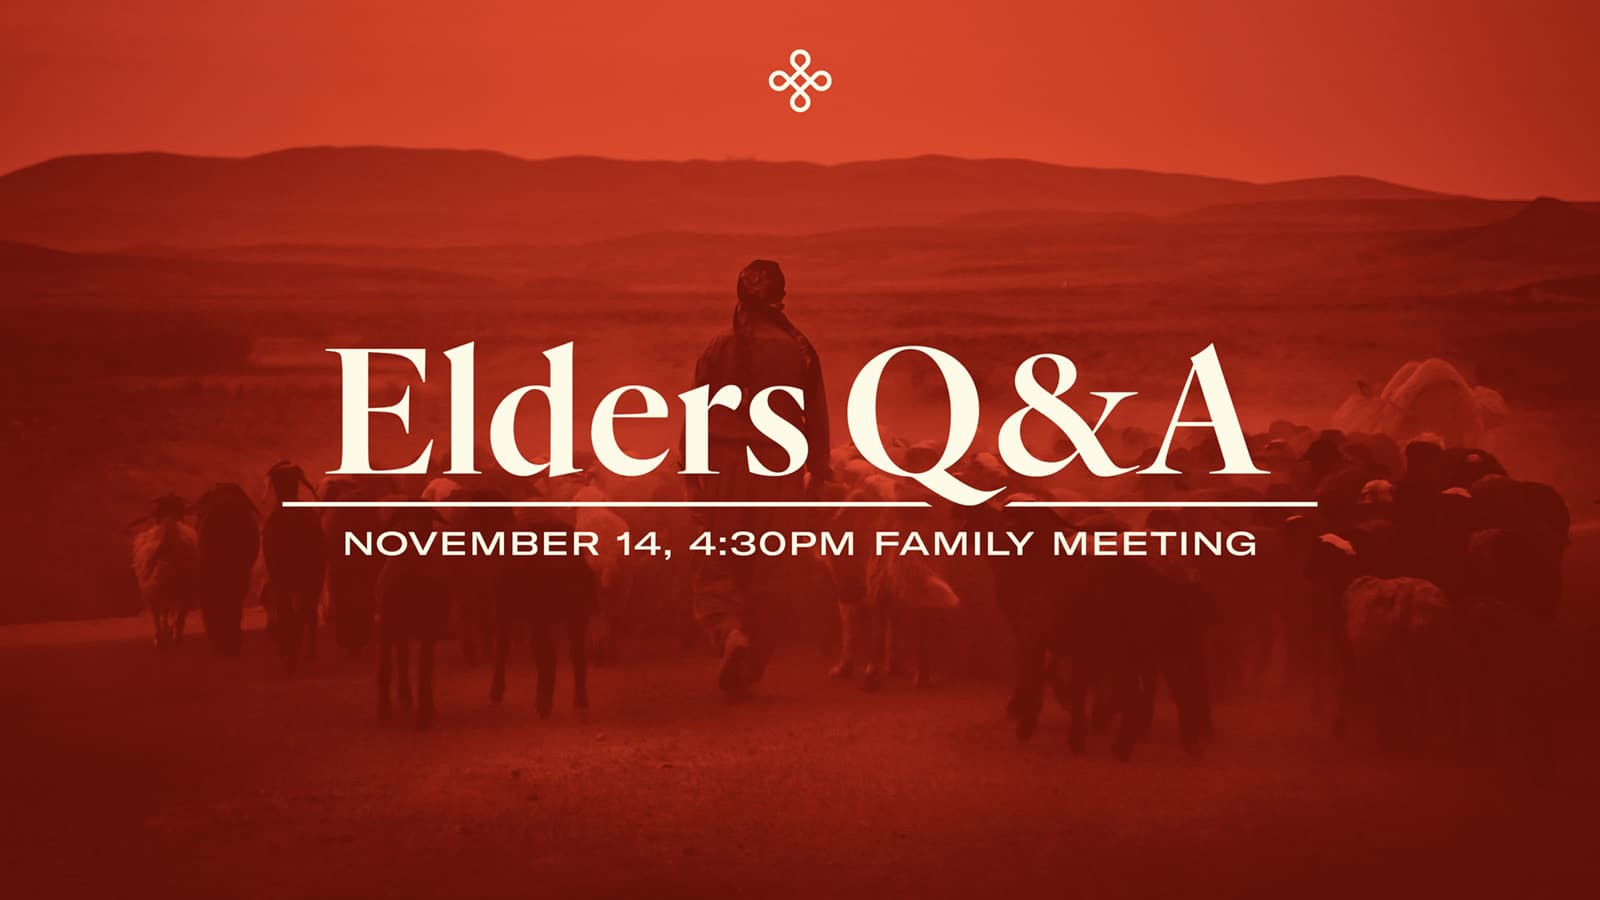 Now Taking Questions for Our Annual Elders Q&A